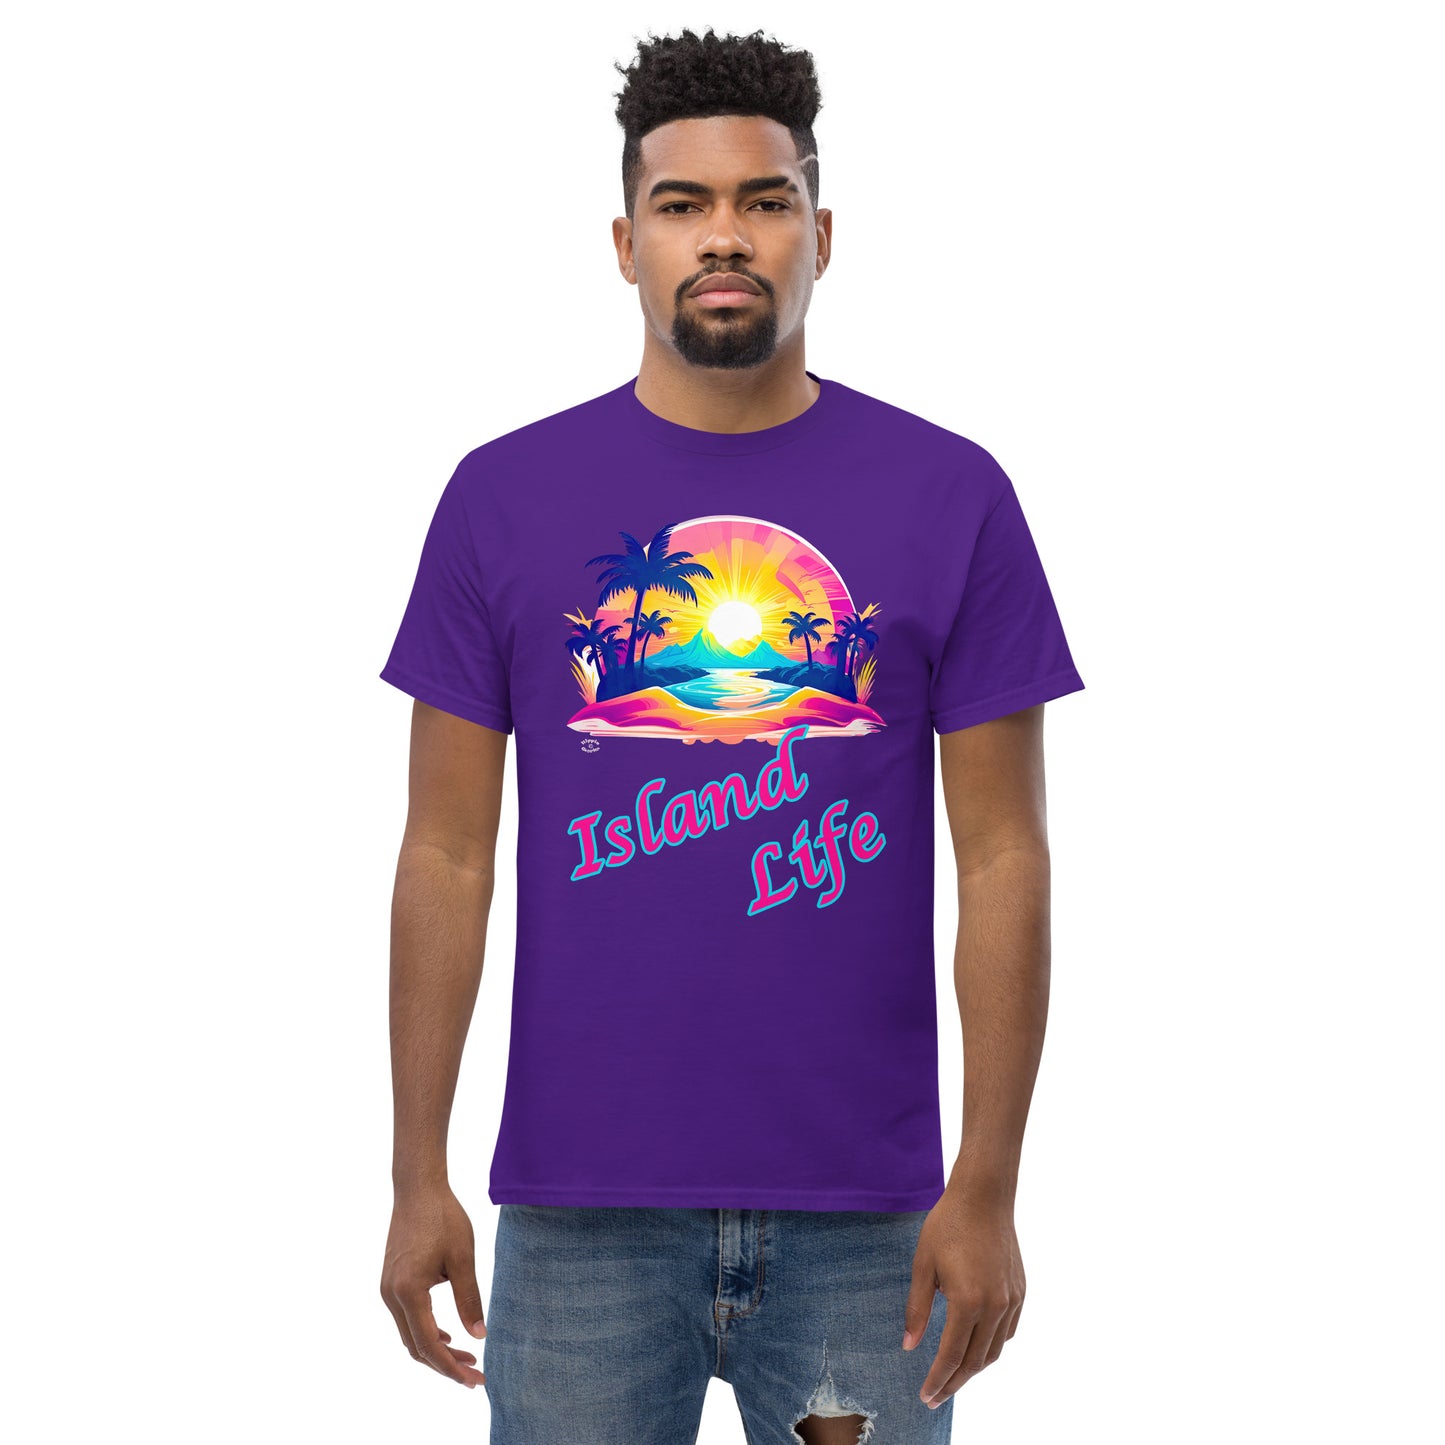 A picture of a man modeling a Men's Classic Tee / Tshirt with a large picture on the front of a tropical island paradise and the text Island Life underneath - front - purple